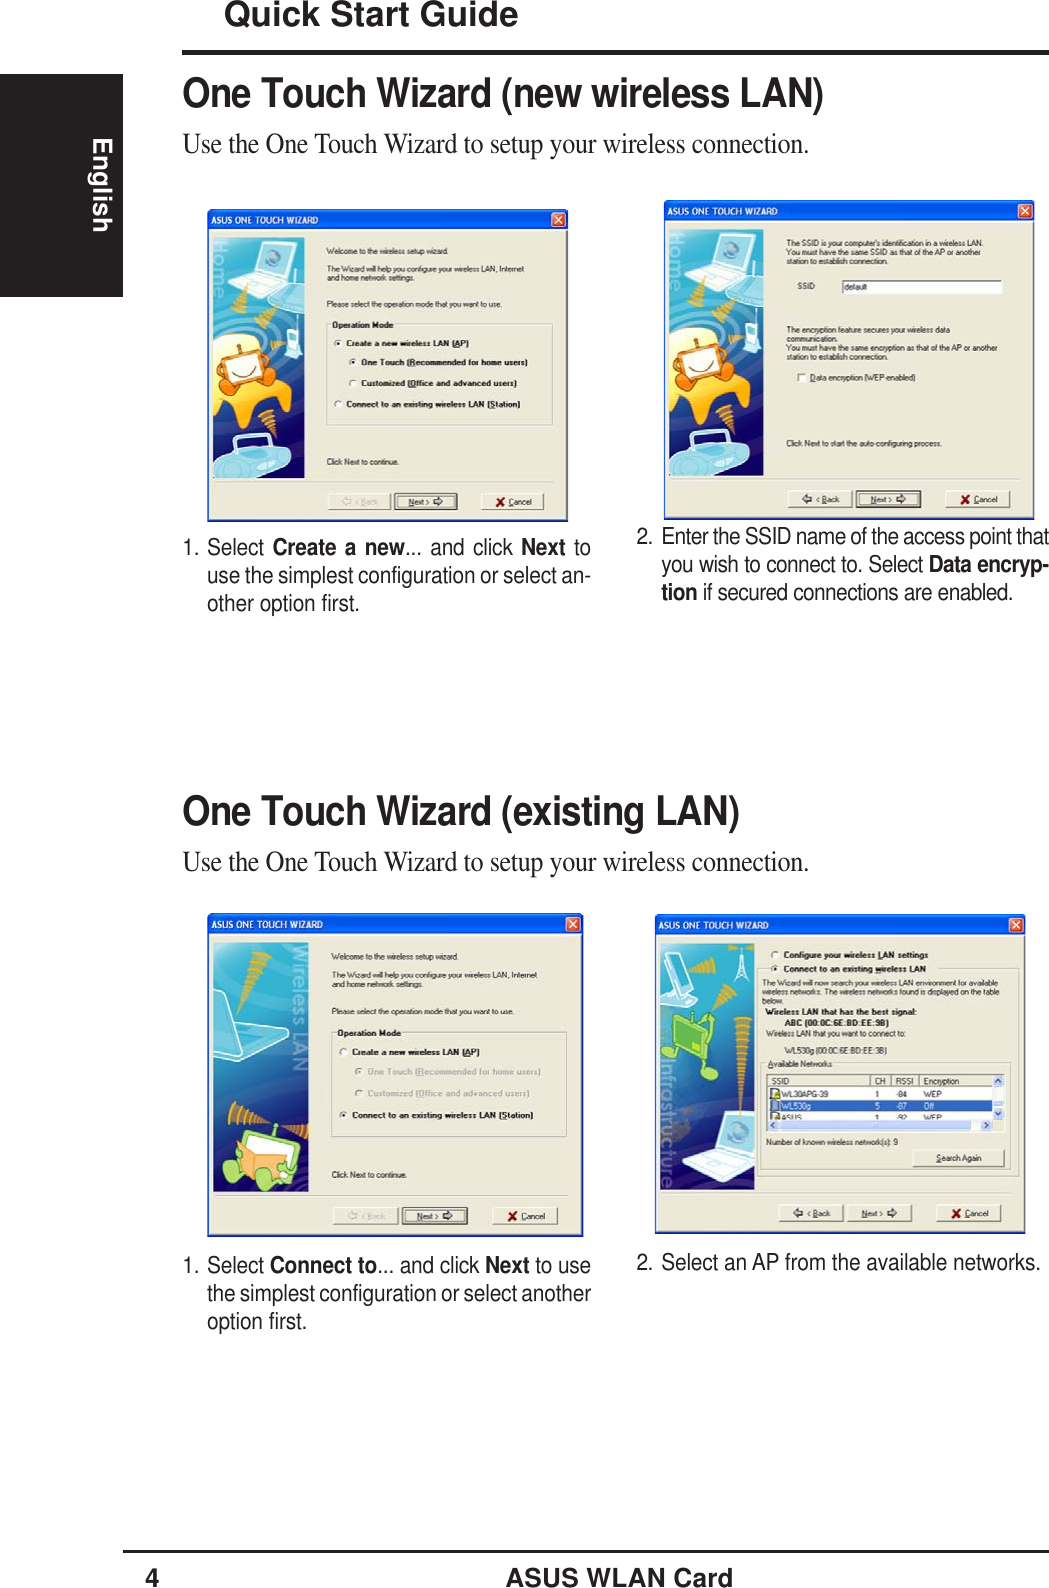 4ASUS WLAN CardQuick Start GuideEnglishOne Touch Wizard (new wireless LAN)Use the One Touch Wizard to setup your wireless connection.1. Select Create a new... and click Next touse the simplest configuration or select an-other option first.2. Enter the SSID name of the access point thatyou wish to connect to. Select Data encryp-tion if secured connections are enabled.One Touch Wizard (existing LAN)Use the One Touch Wizard to setup your wireless connection.1. Select Connect to... and click Next to usethe simplest configuration or select anotheroption first.2. Select an AP from the available networks.